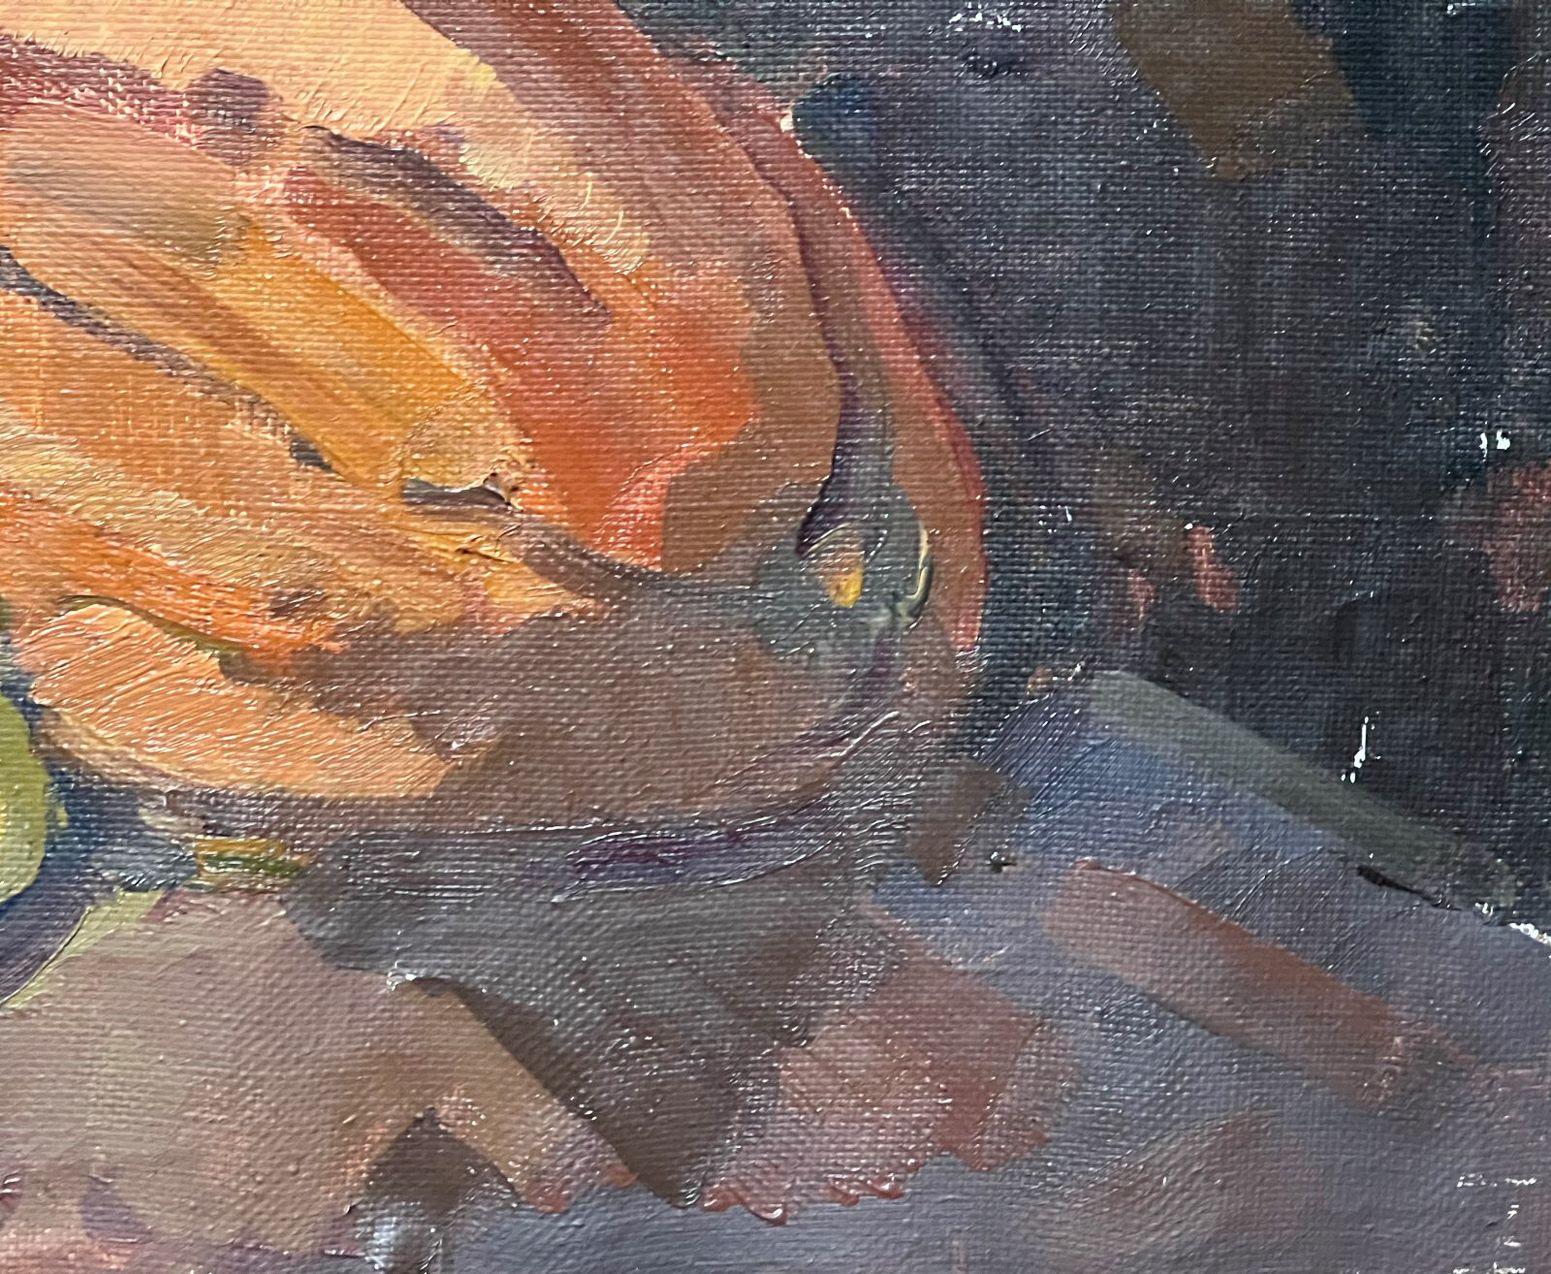 Artist: Peter Tovpev
Work: Original oil painting, handmade artwork, one of a kind 
Medium: Oil on Canvas 
Year: 2020
Style: Expressionism
Title: Evening Still Life
Size: 23.5